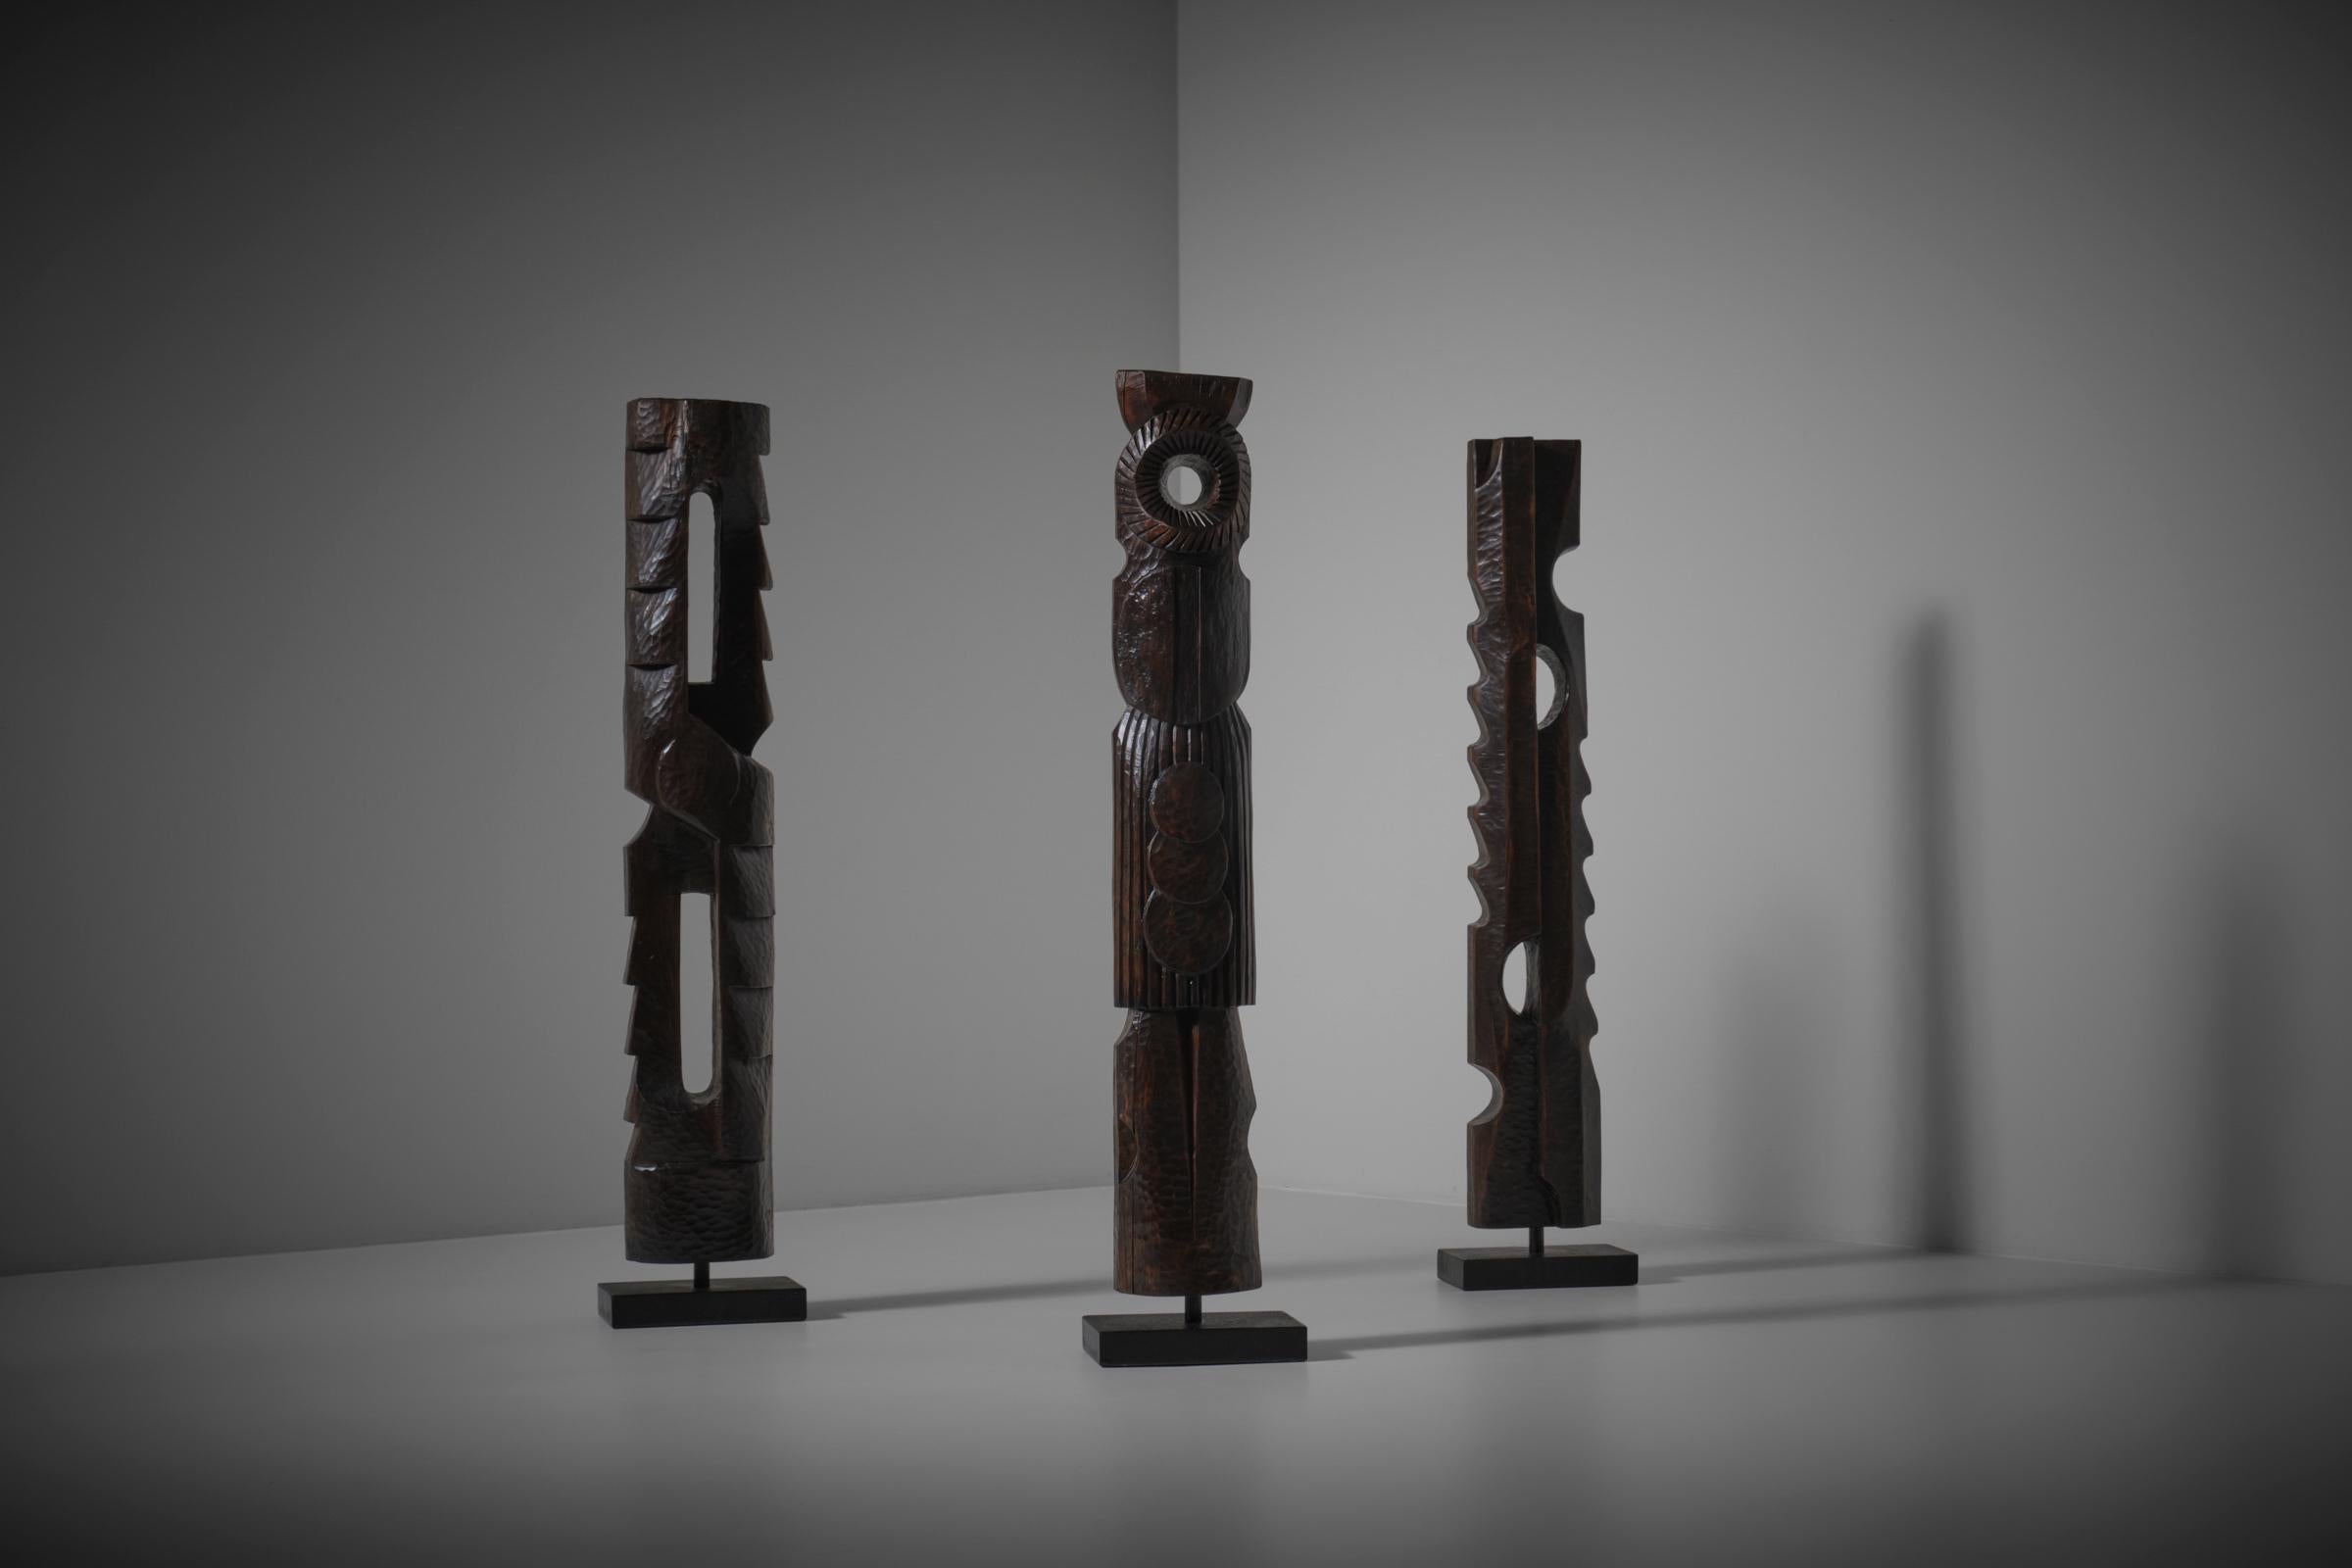 Interesting large group of abstract wooden sculptures, France 1970s. The sculptures are carved by hand with great conviction and expression, carved out of fine Solid Ash wood with a nice warm undertone. Very strong and interesting graphic shapes and